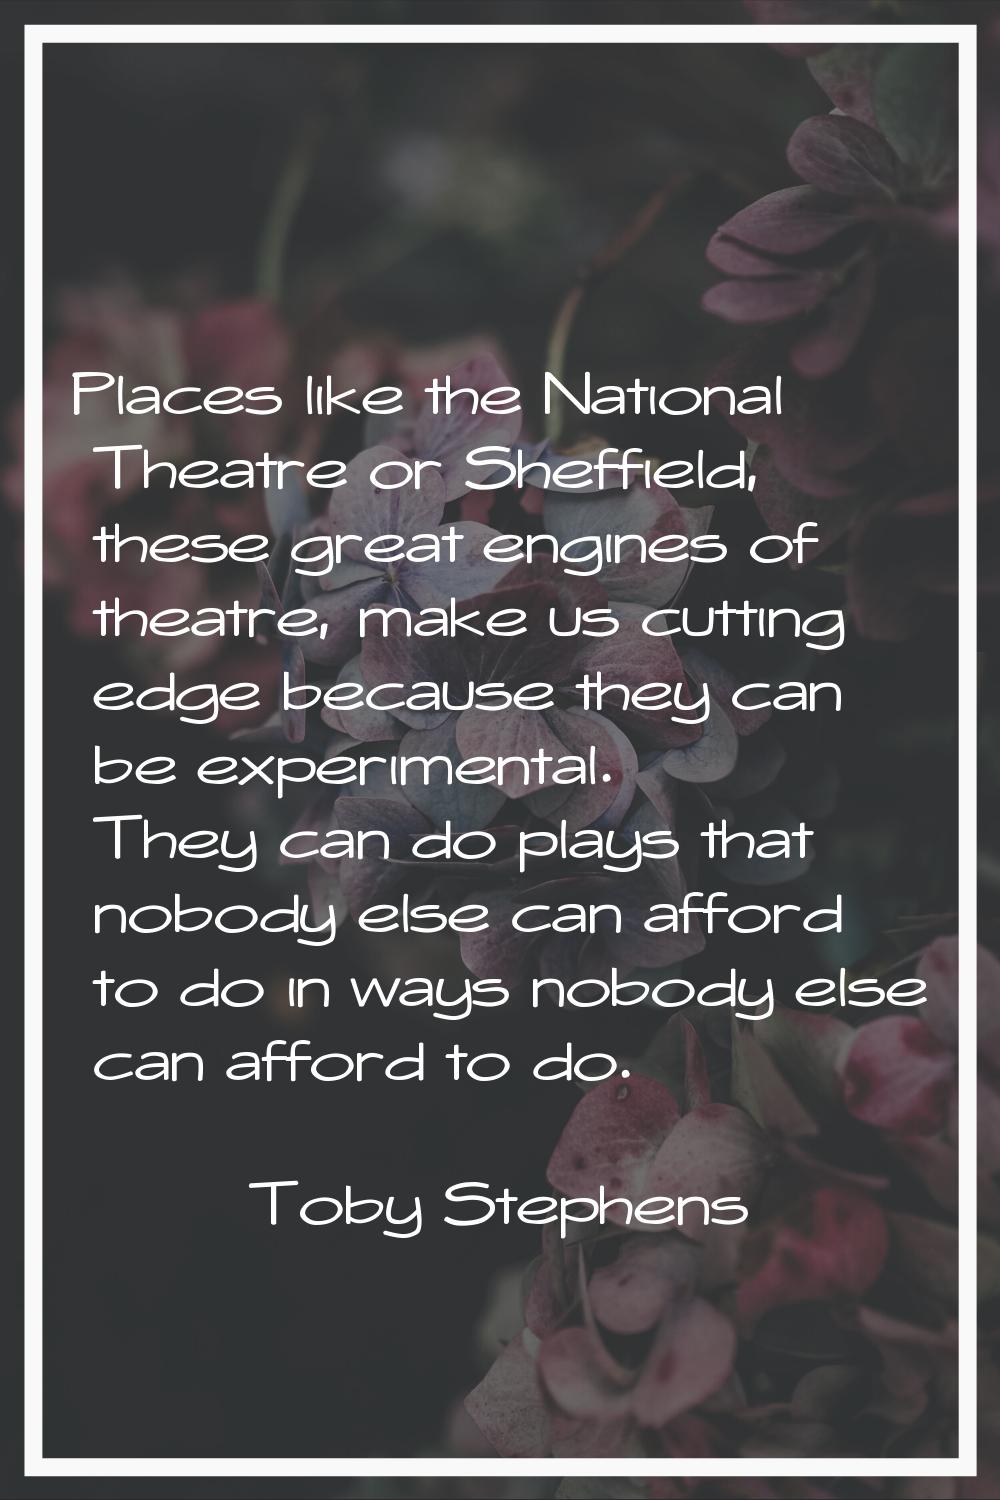 Places like the National Theatre or Sheffield, these great engines of theatre, make us cutting edge